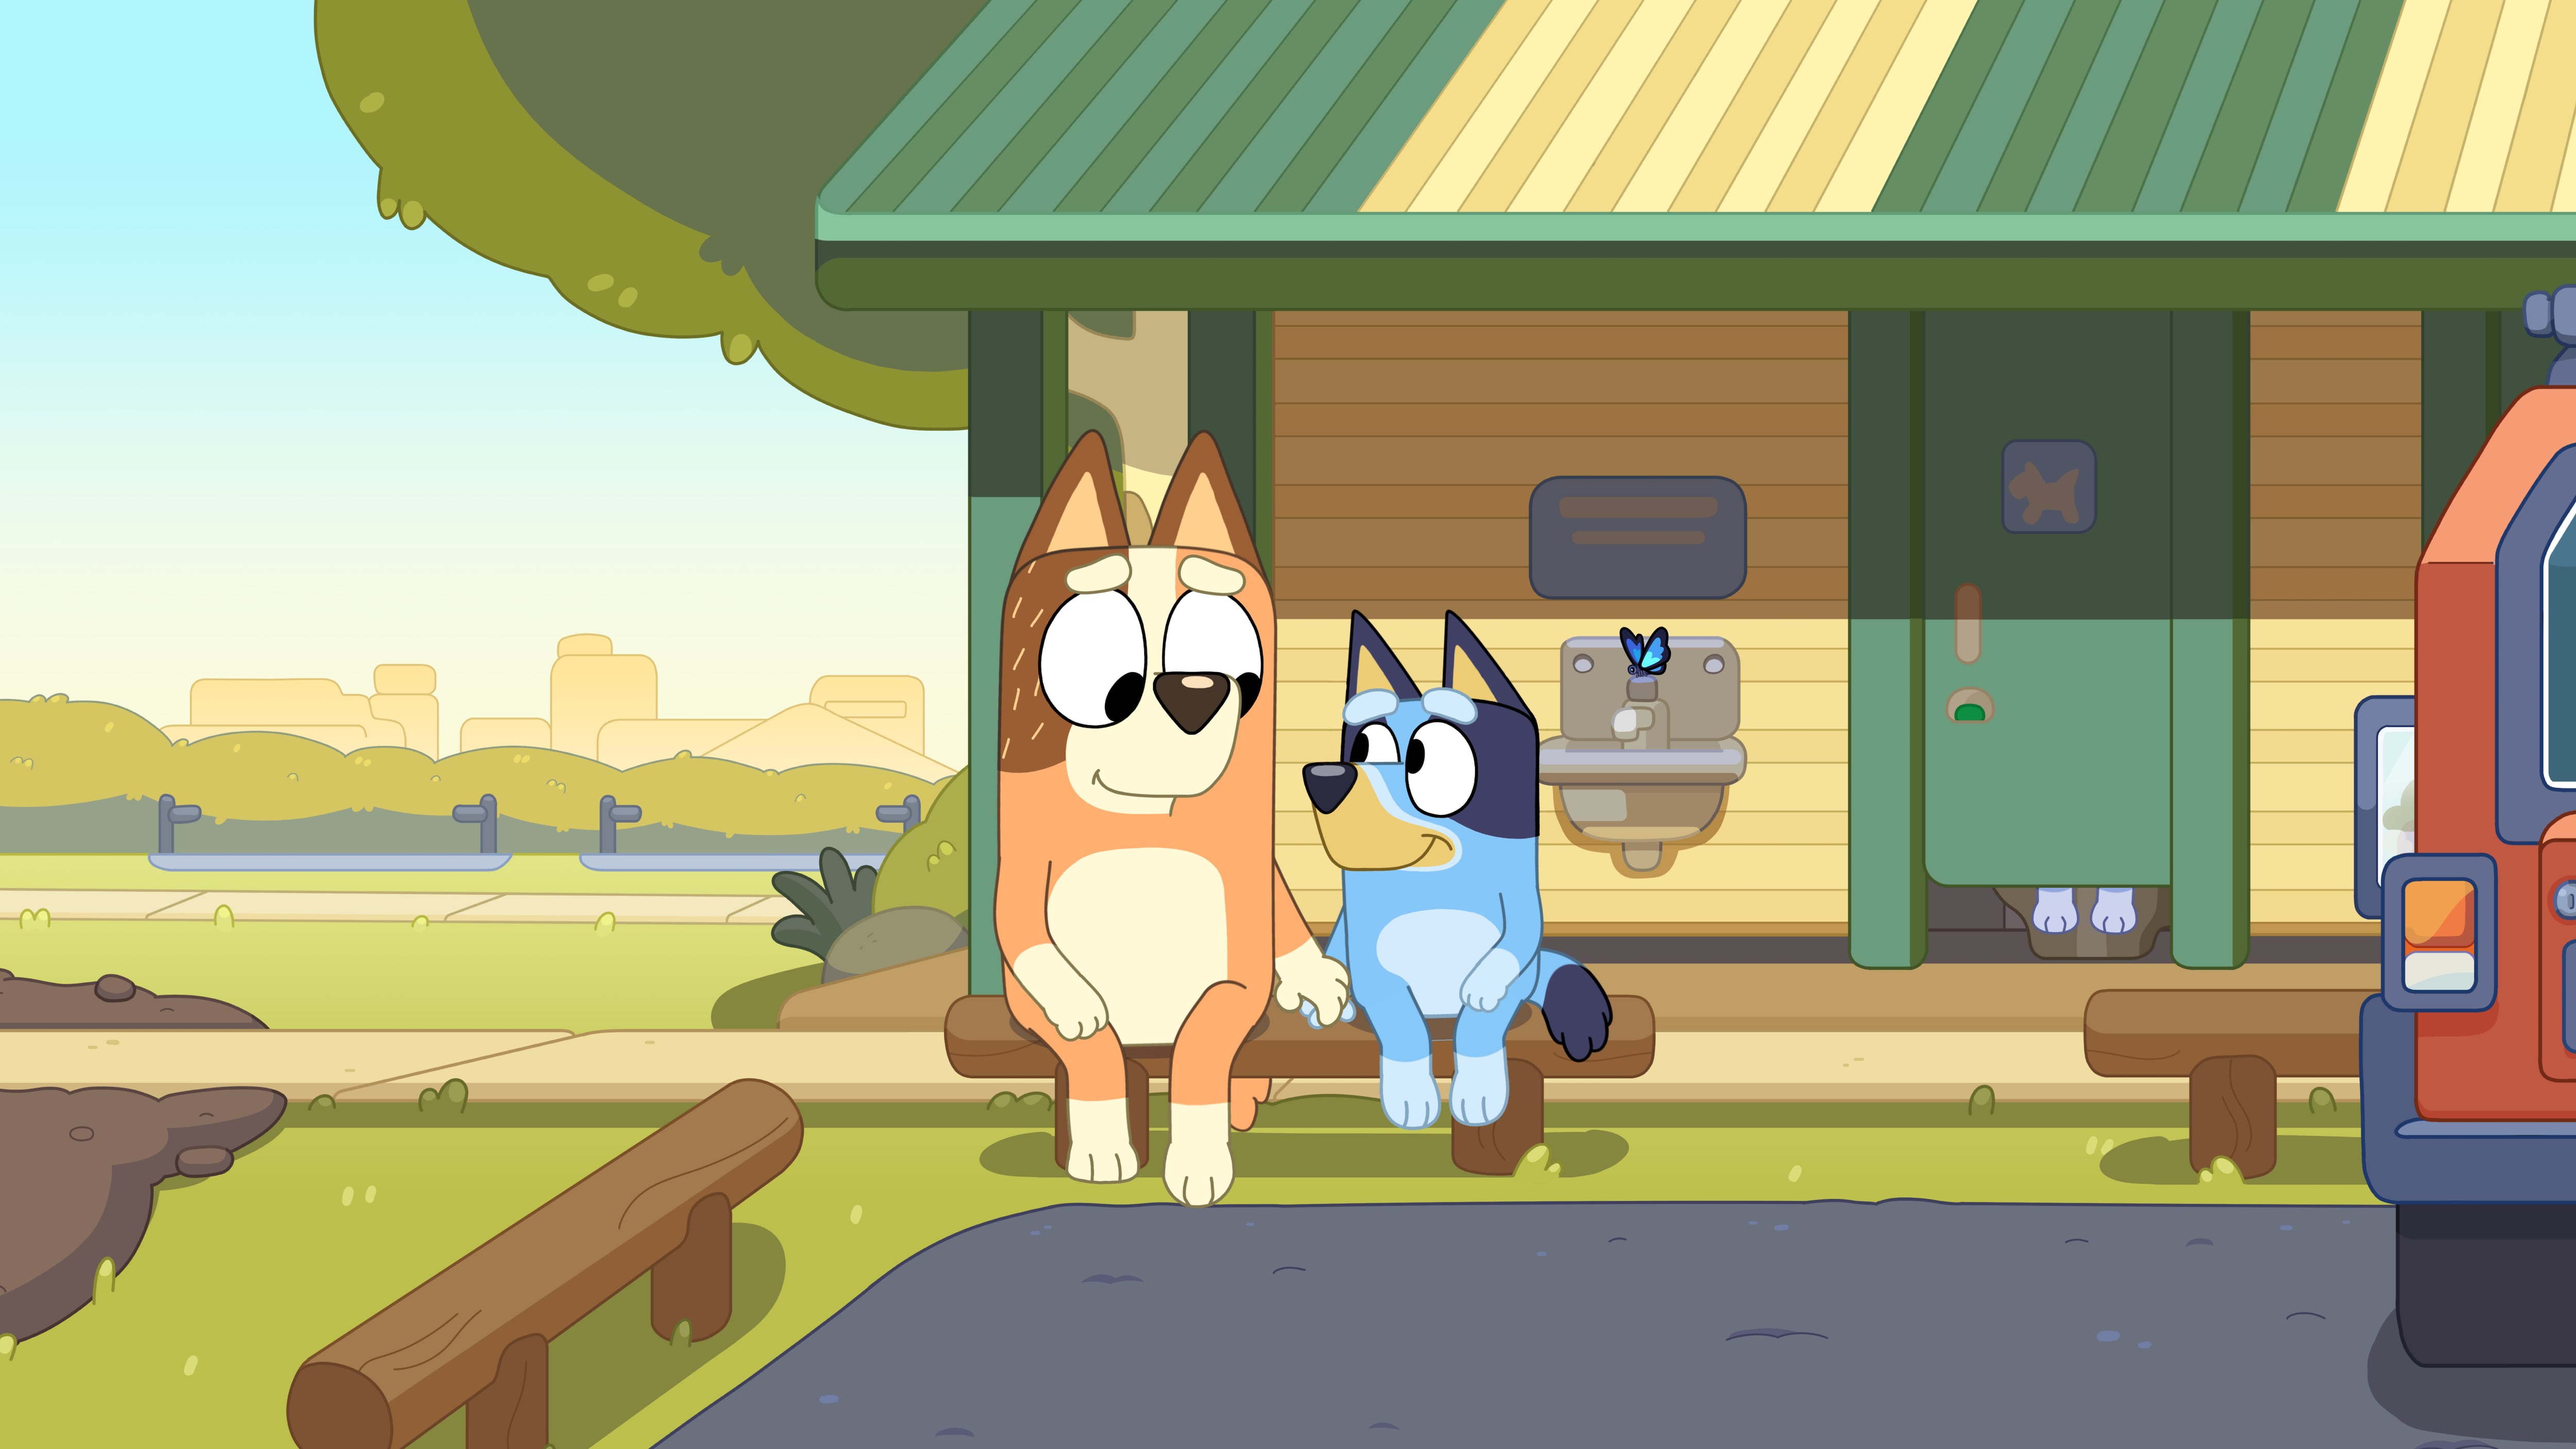 Bluey extended episode The Sign premieres on Sunday